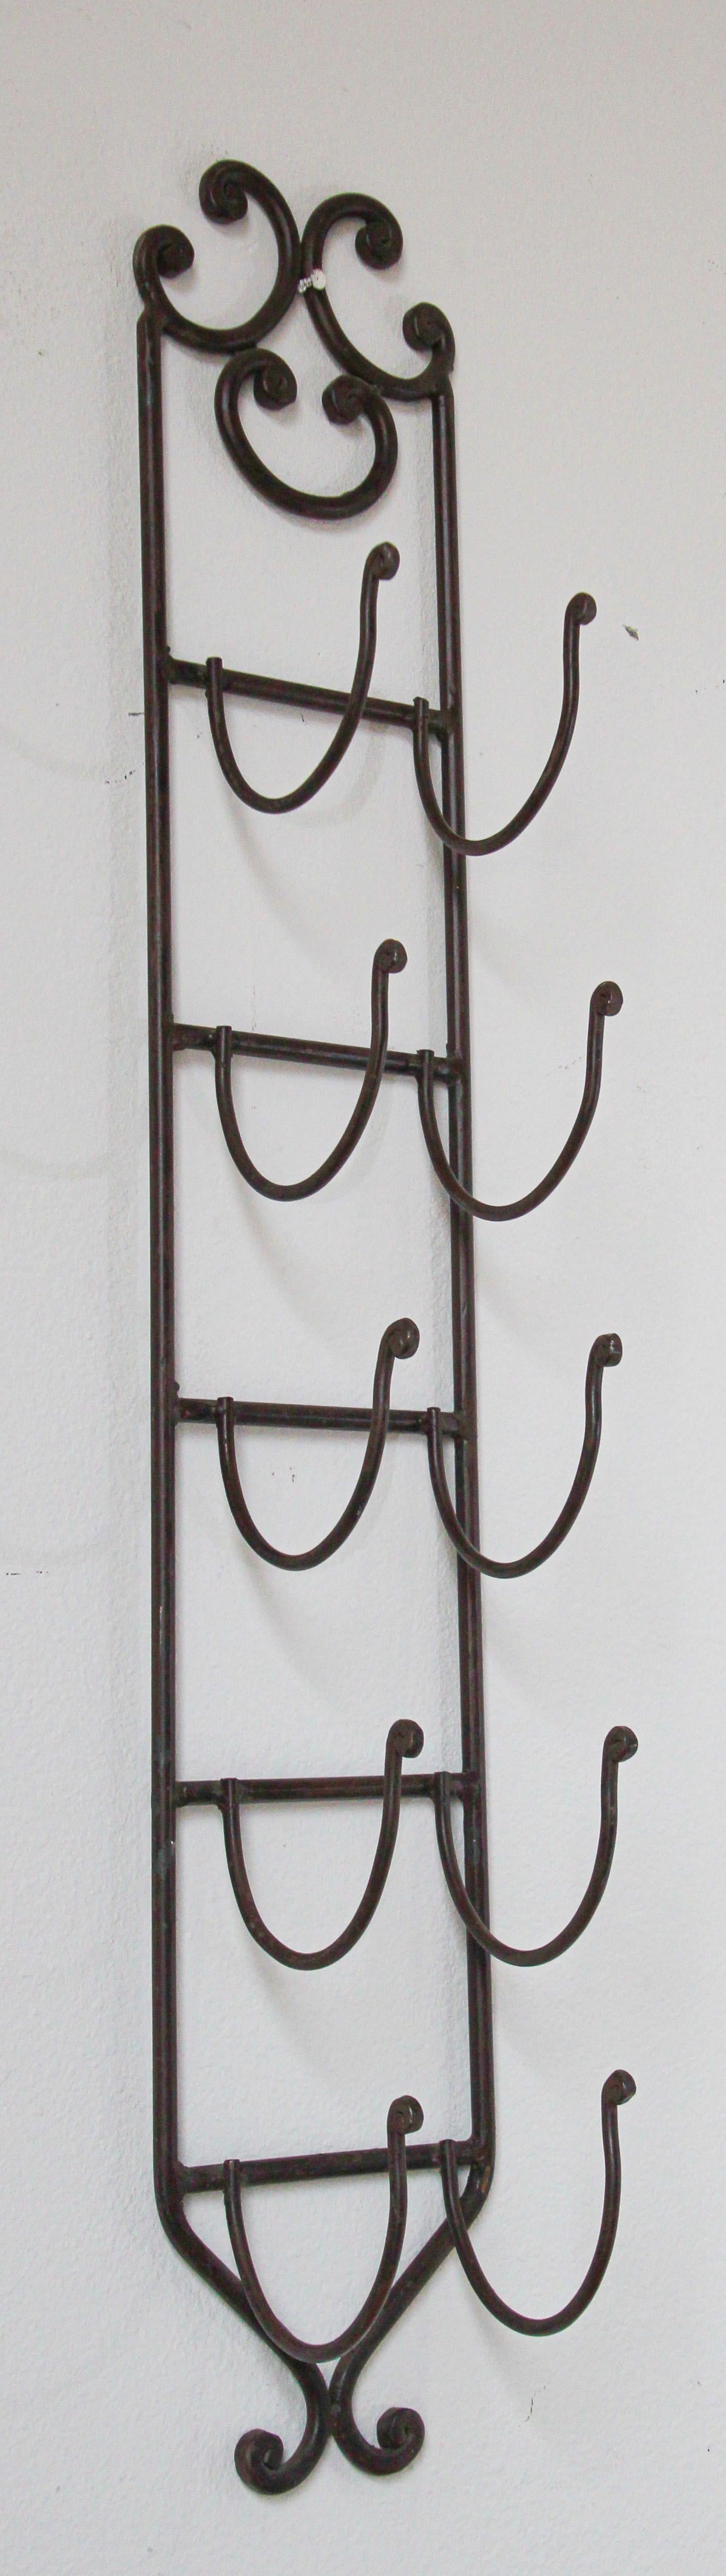 Wrought iron hand forged bathroom towel holder.
Beautiful and functional, our scrolled wall mount bath towel holder.
This handcrafted towel holder will add an authentic Mission, Colonial or Country charm to your any kitchen or bathroom.
Could be